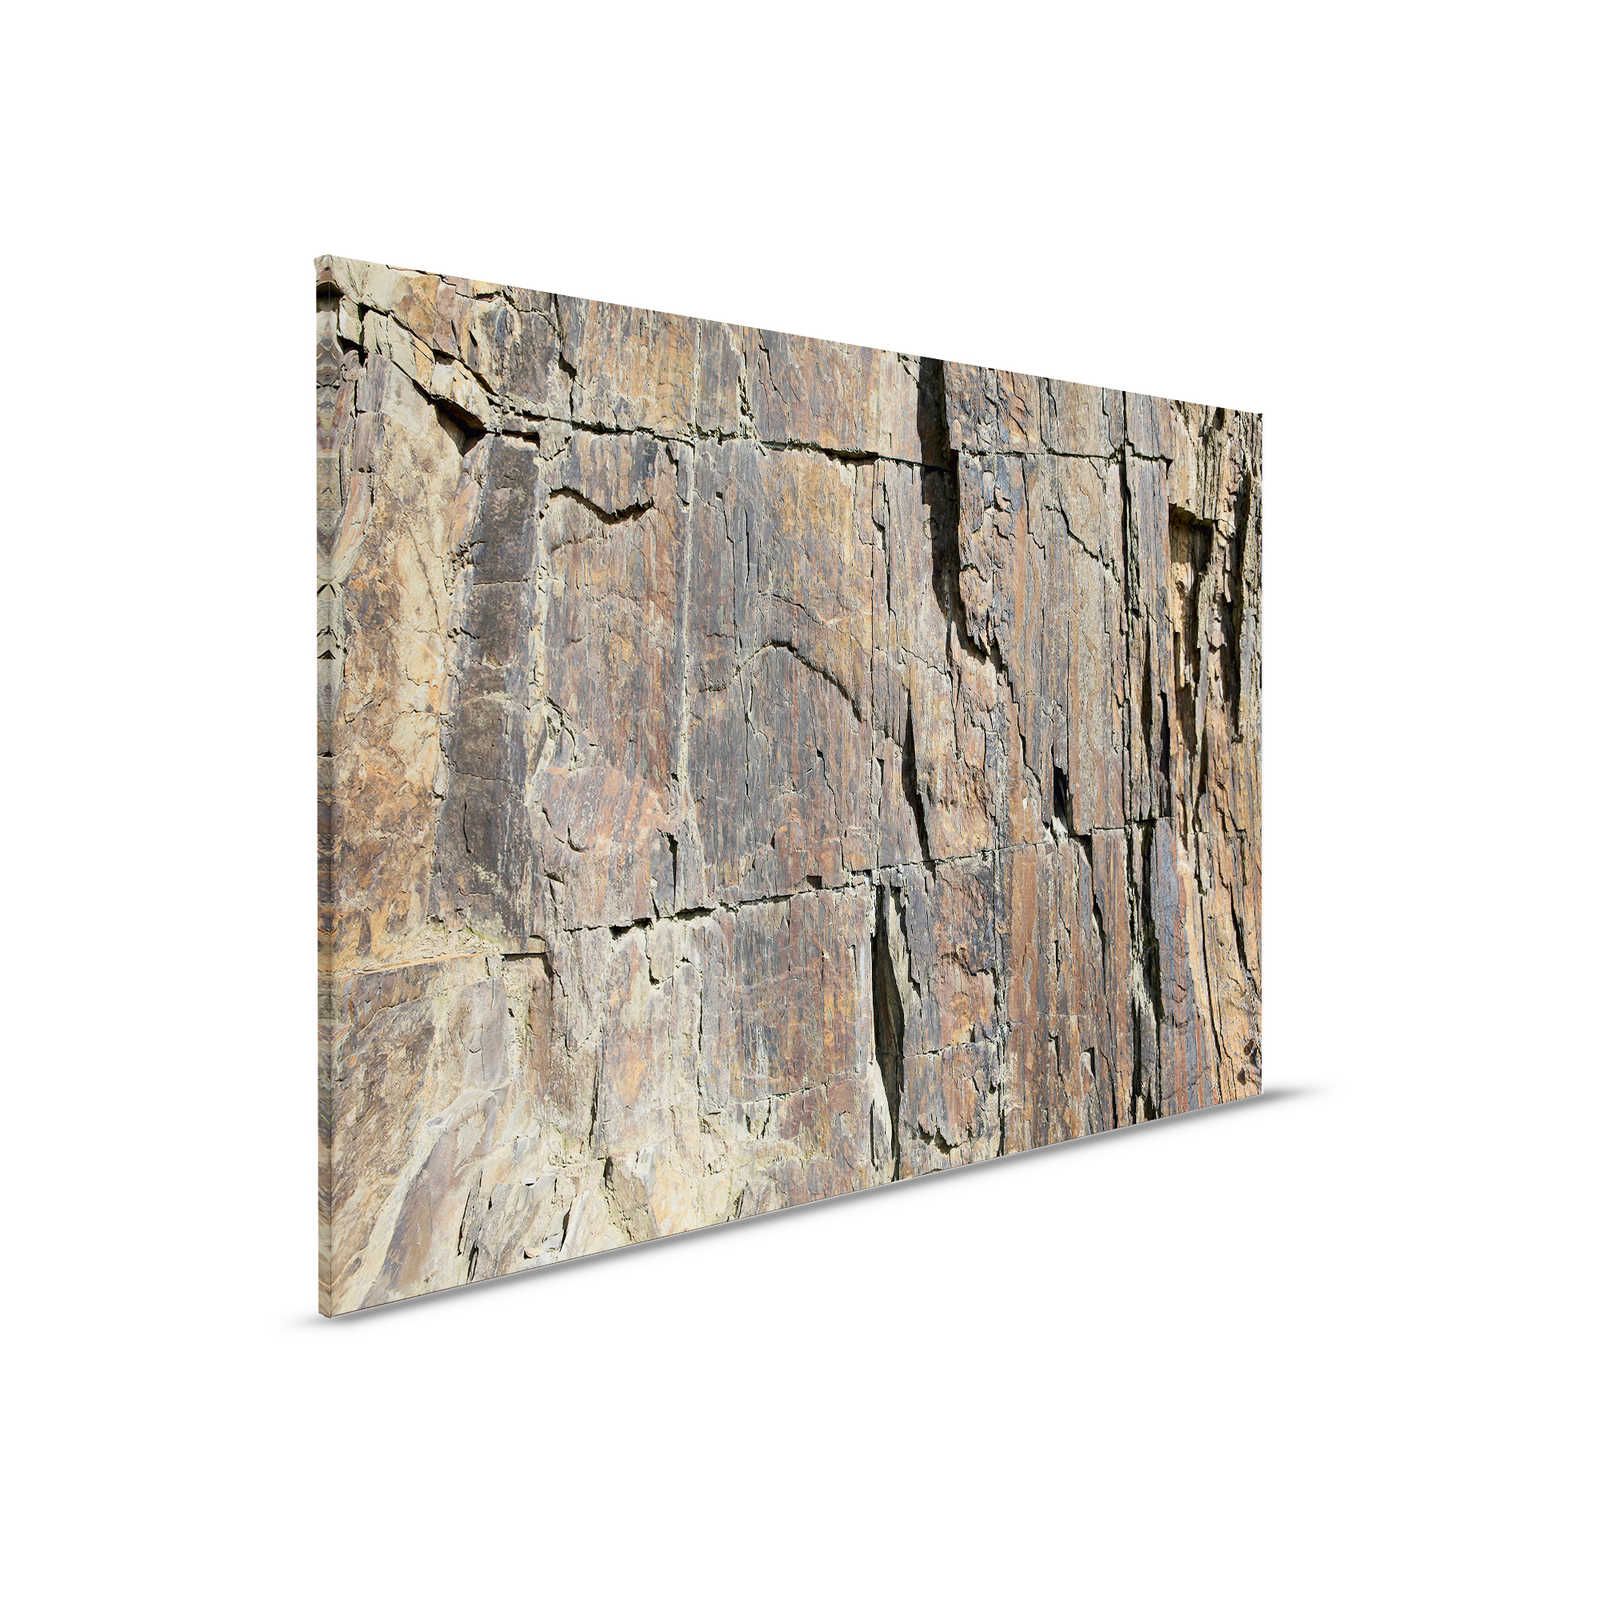         Canvas painting stone look 3D effect, natural stone wall - 0.90 m x 0.60 m
    